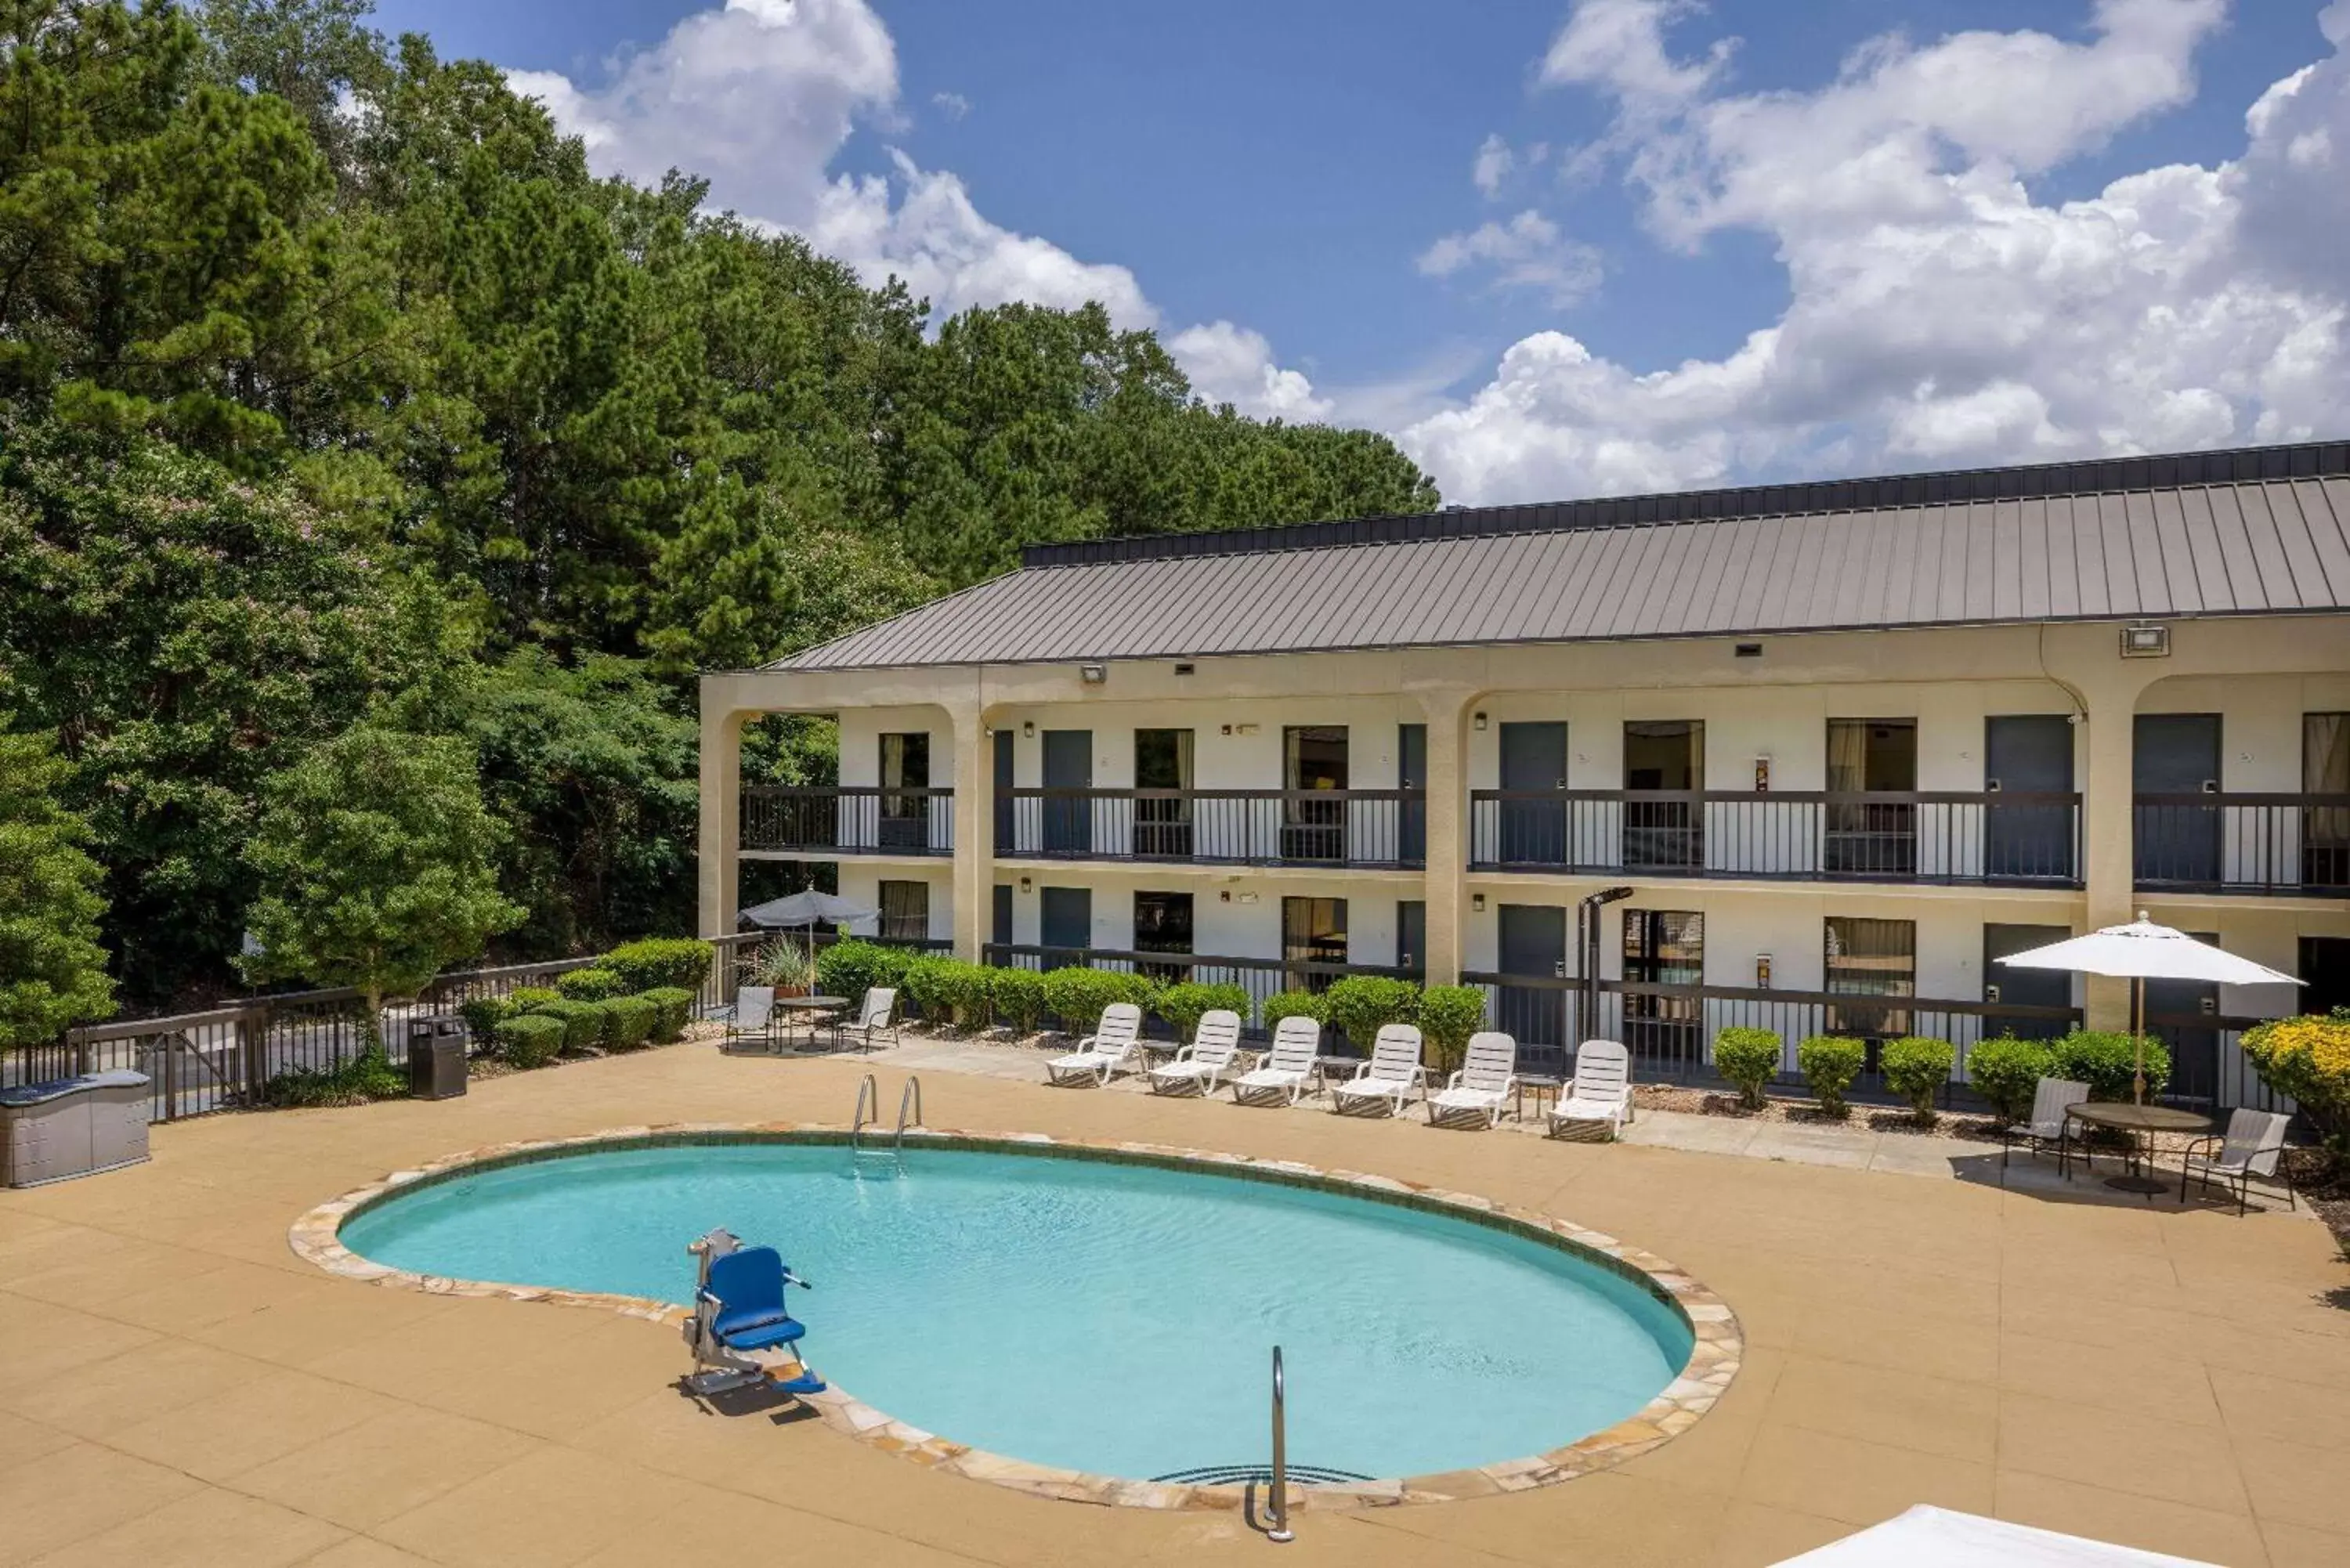 Pool view, Property Building in Baymont by Wyndham Columbus GA